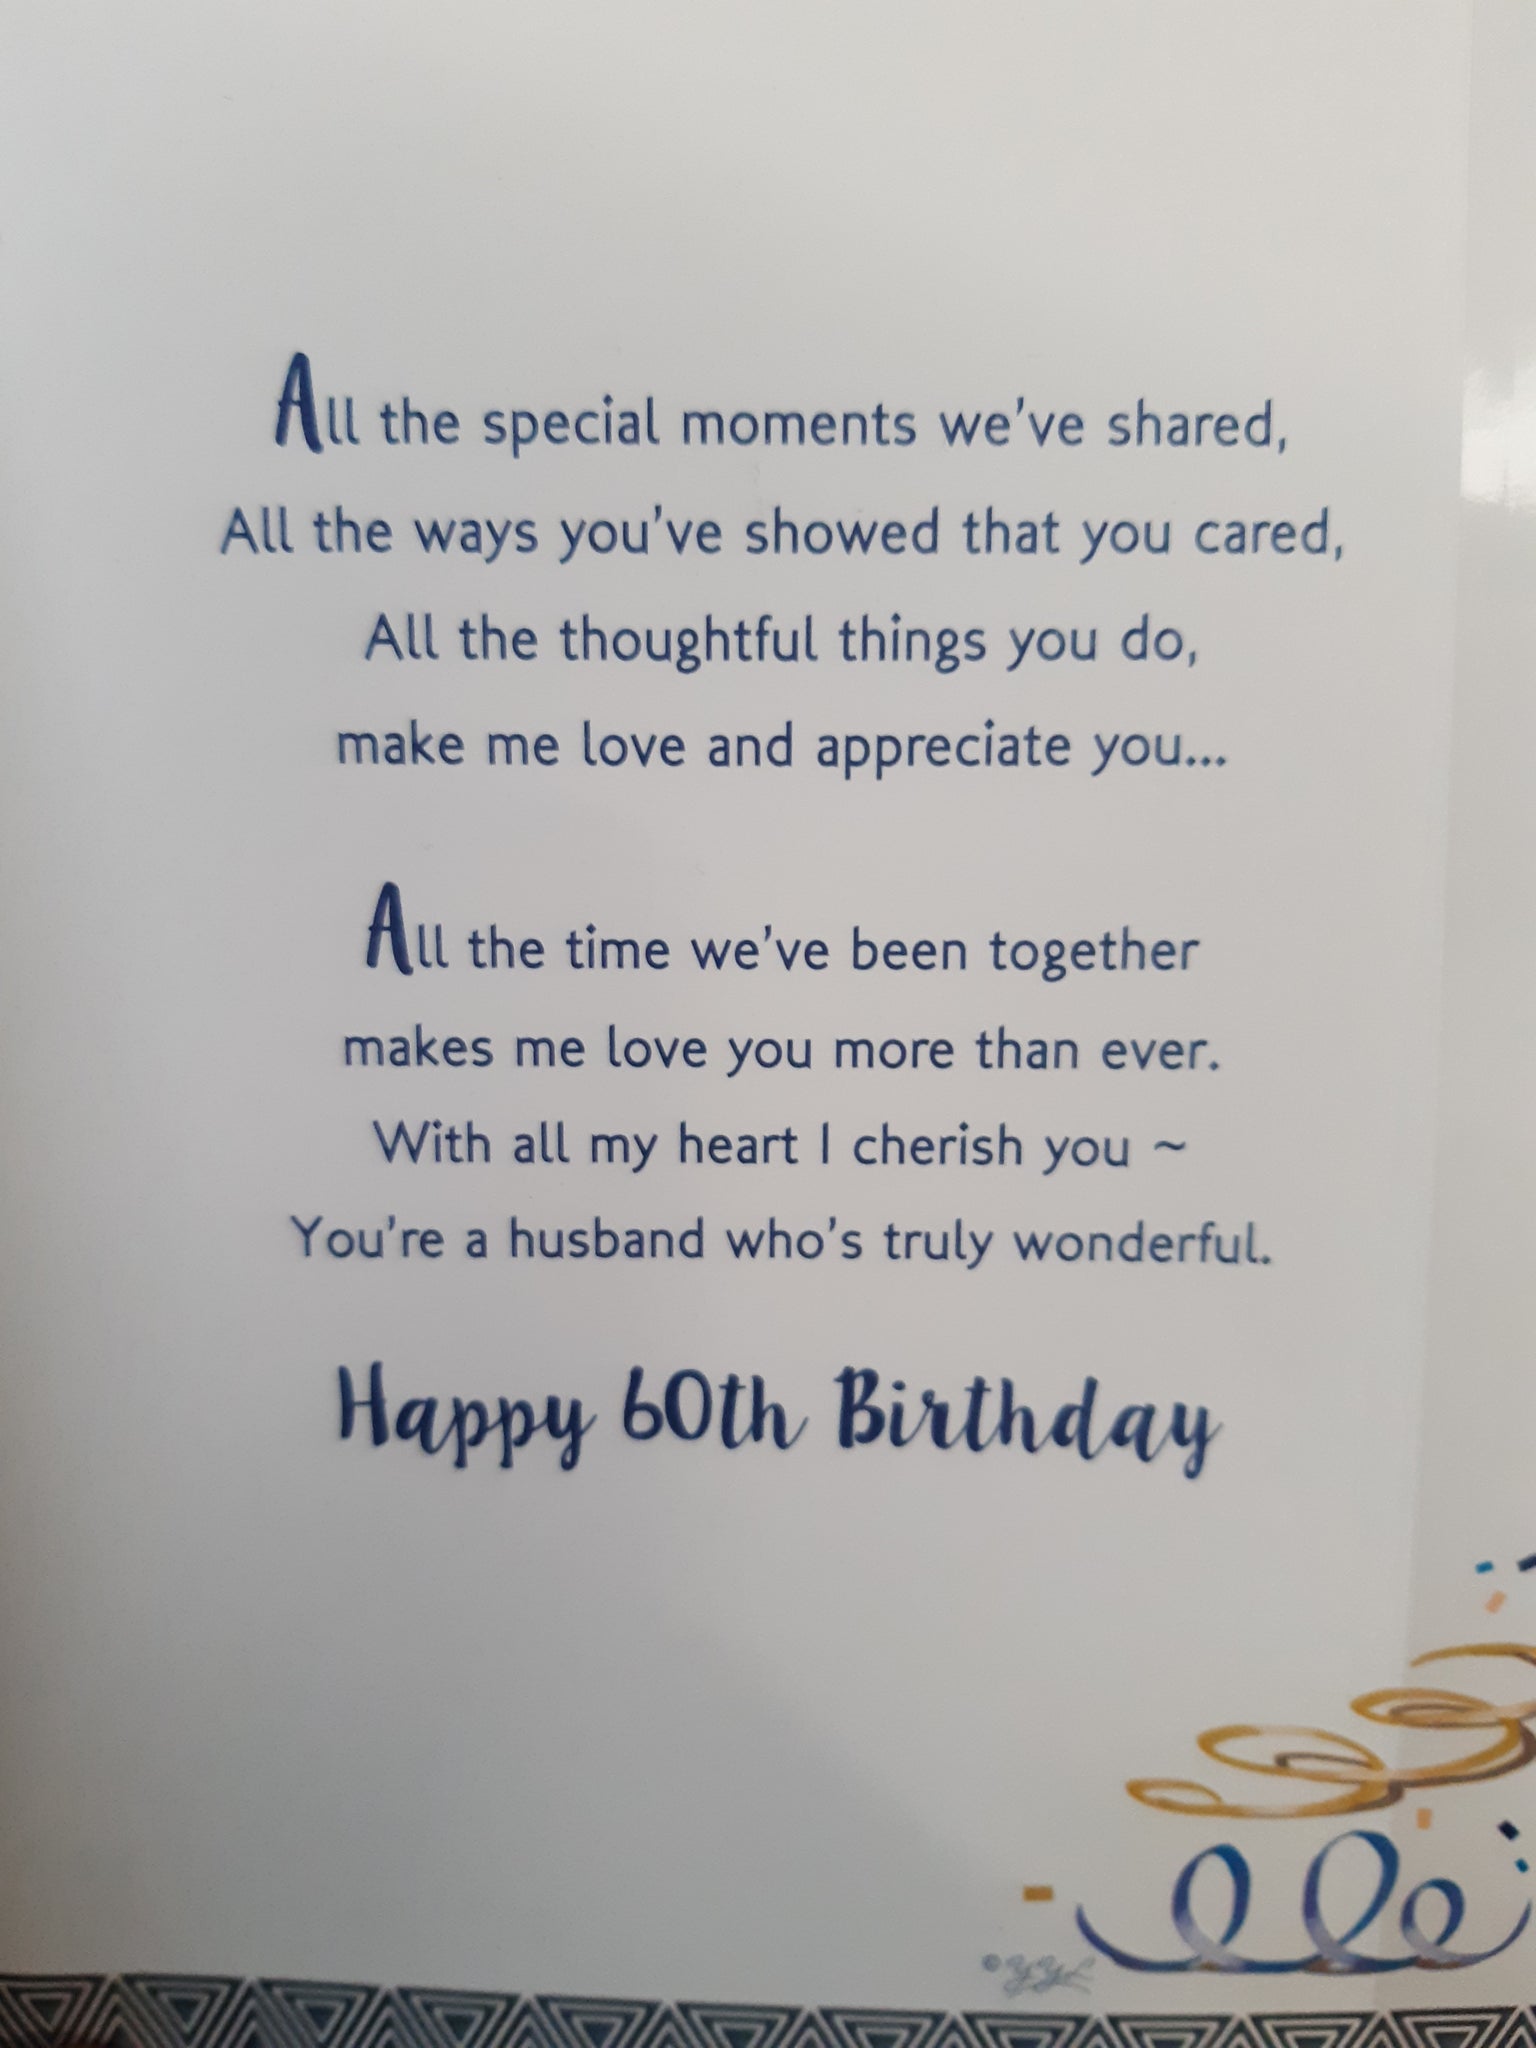 With Love To My Husband On Your 60th Birthday Celebrity Style Greeting Card